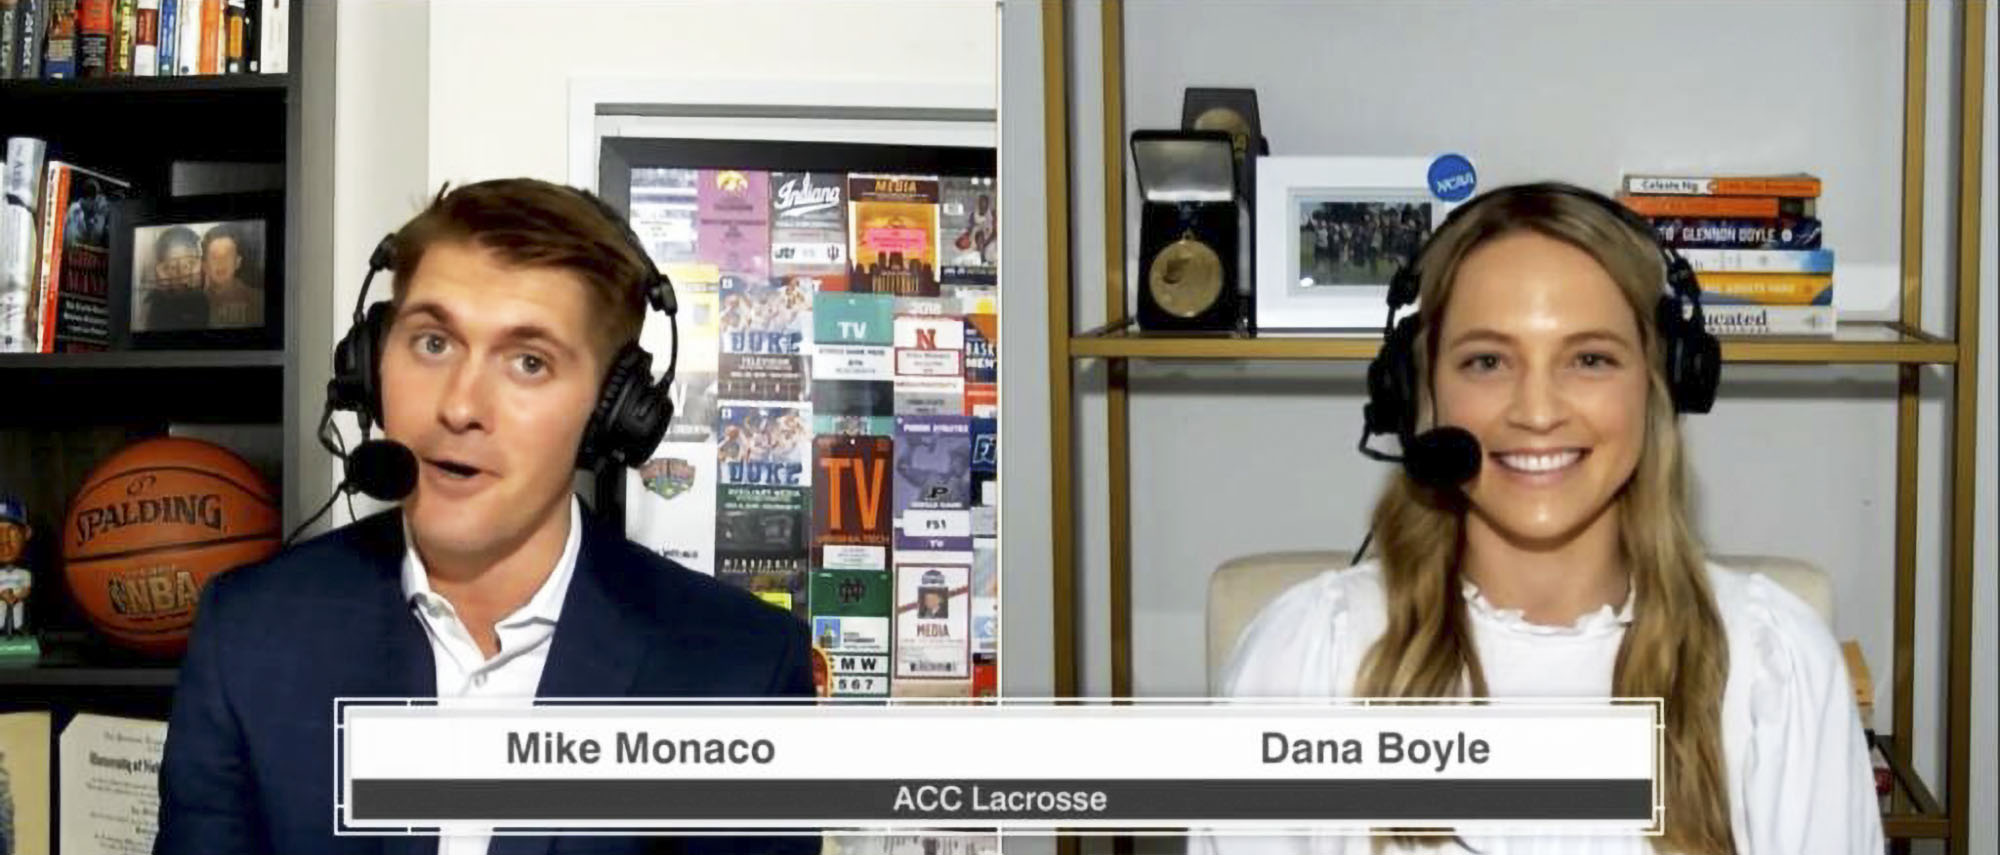 Mike Monaco, left, and Dana Boyle, right, talk to each other on an ESPNU broadcast